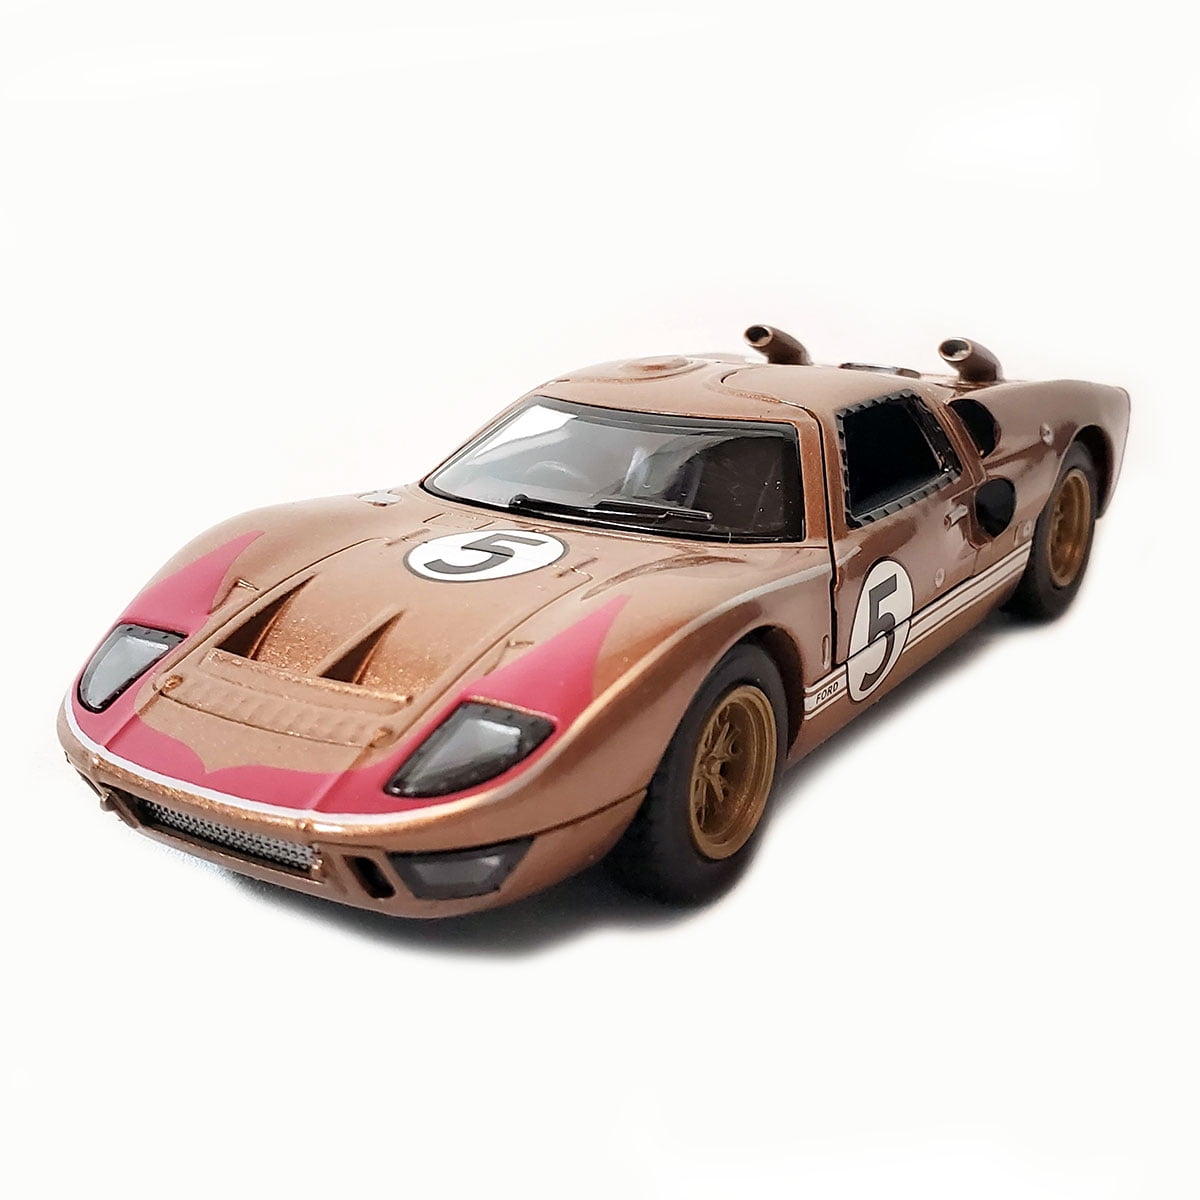 1966 Ford GT40 MKII #5 Heritage Edition Kinsmart 5" Die-cast 1/32 Scale Gold